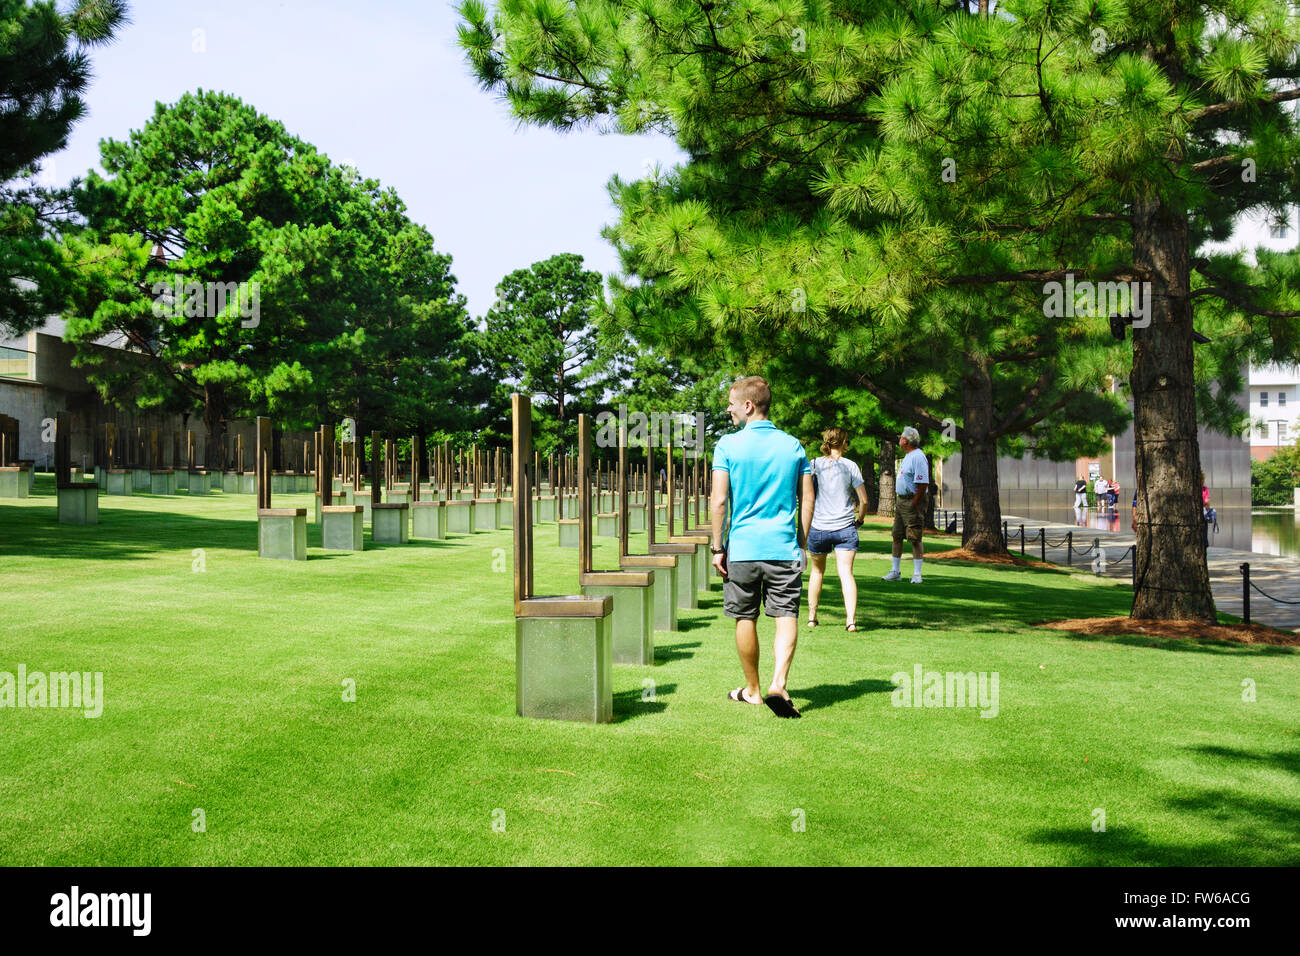 Vistors walk the grounds of the Field of Chairs honoring victims of the Oklahoma City bombing. USA. Stock Photo